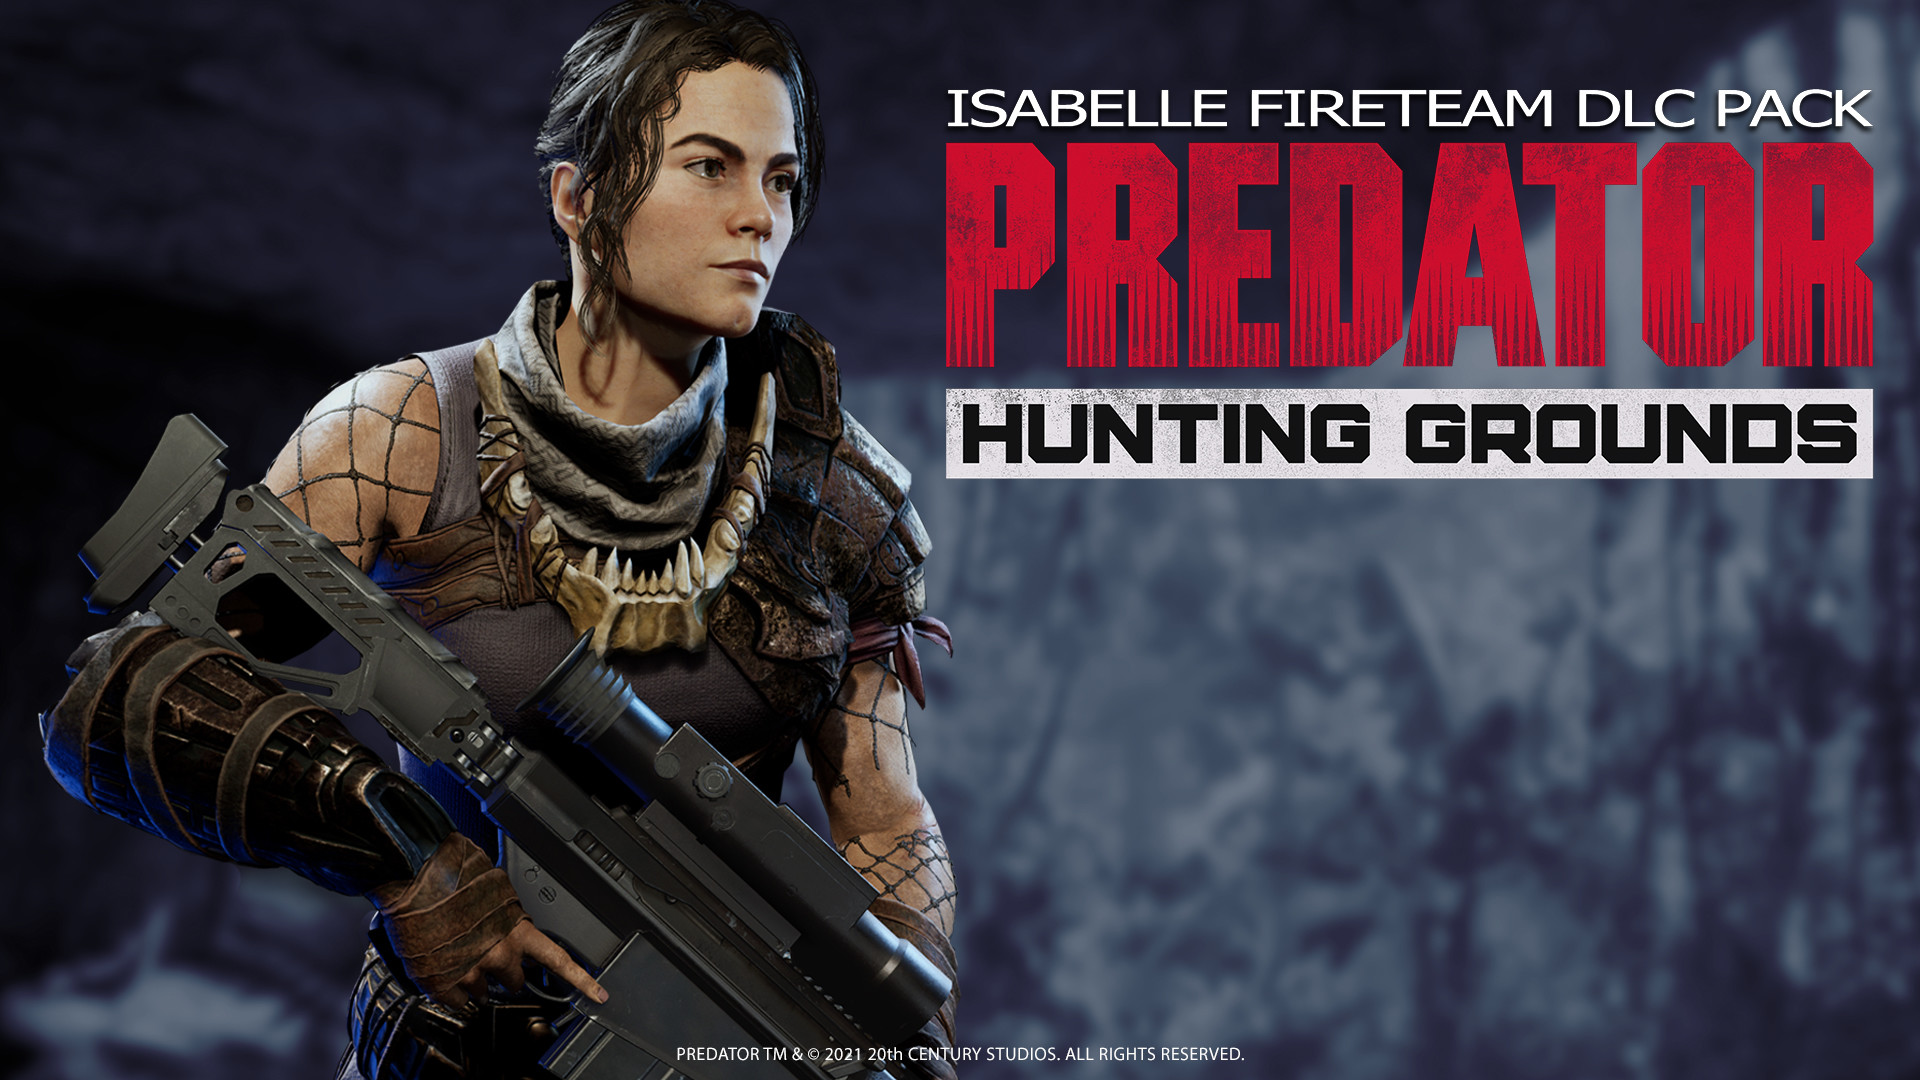 Predator: Hunting Grounds - Isabelle DLC Pack Featured Screenshot #1